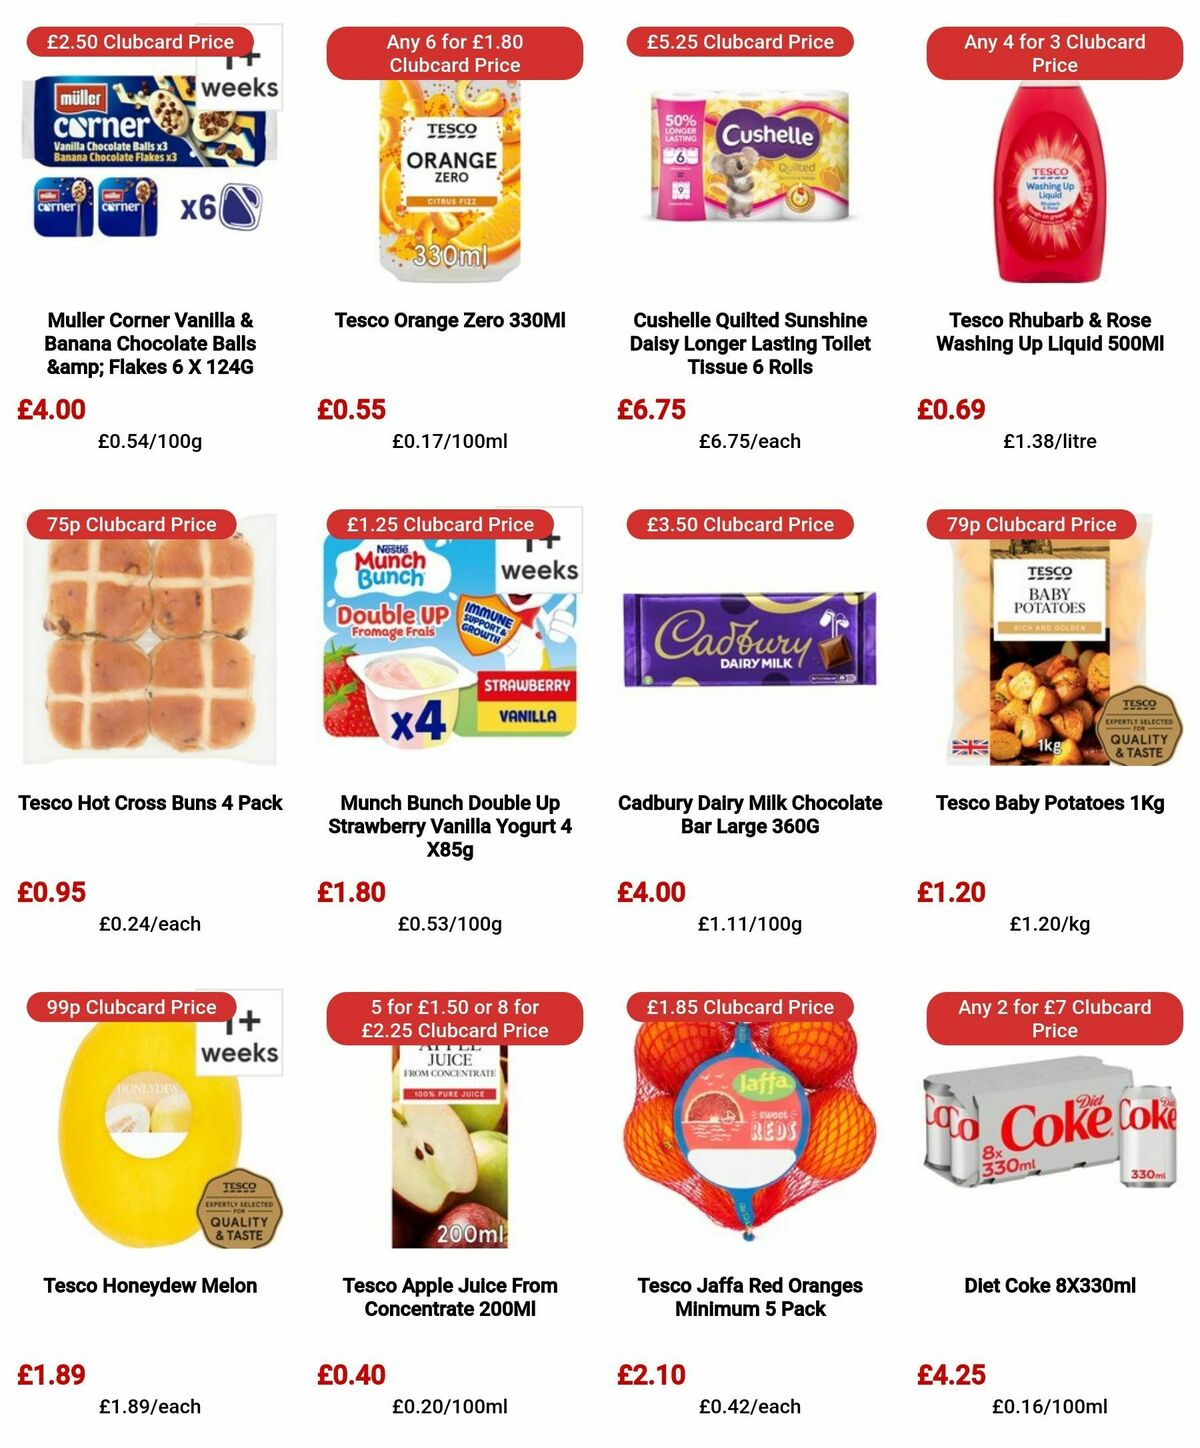 TESCO Offers from 14 March